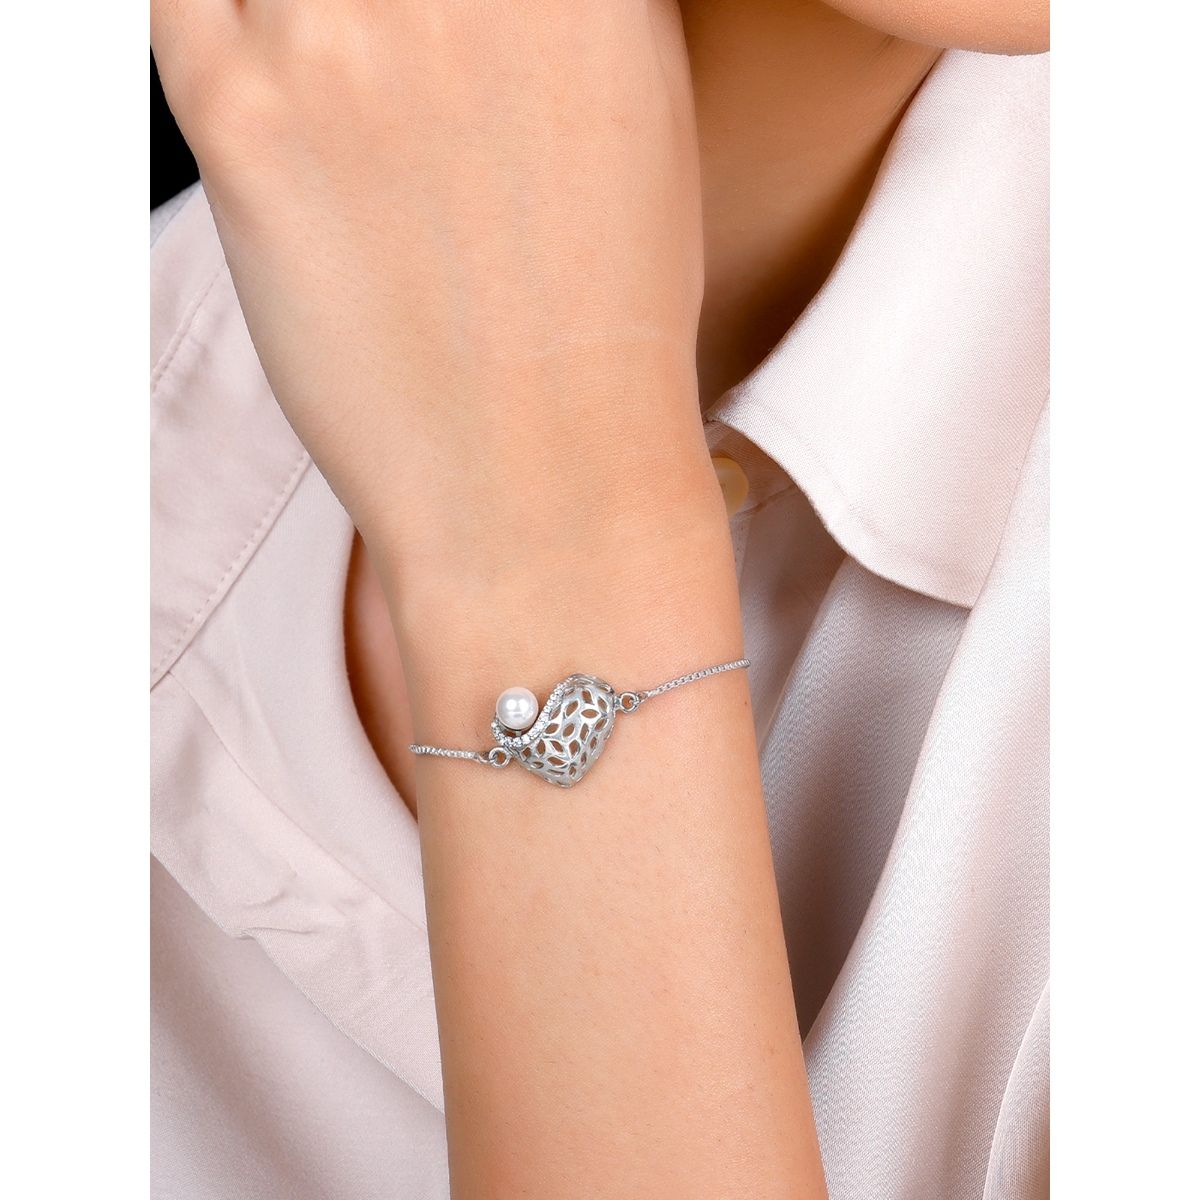 Buy GIVA 925 Sterling Silver Rose Gold Plated Dual Heart Bracelet  Adjustable at Rs4998 online  Jewellery online